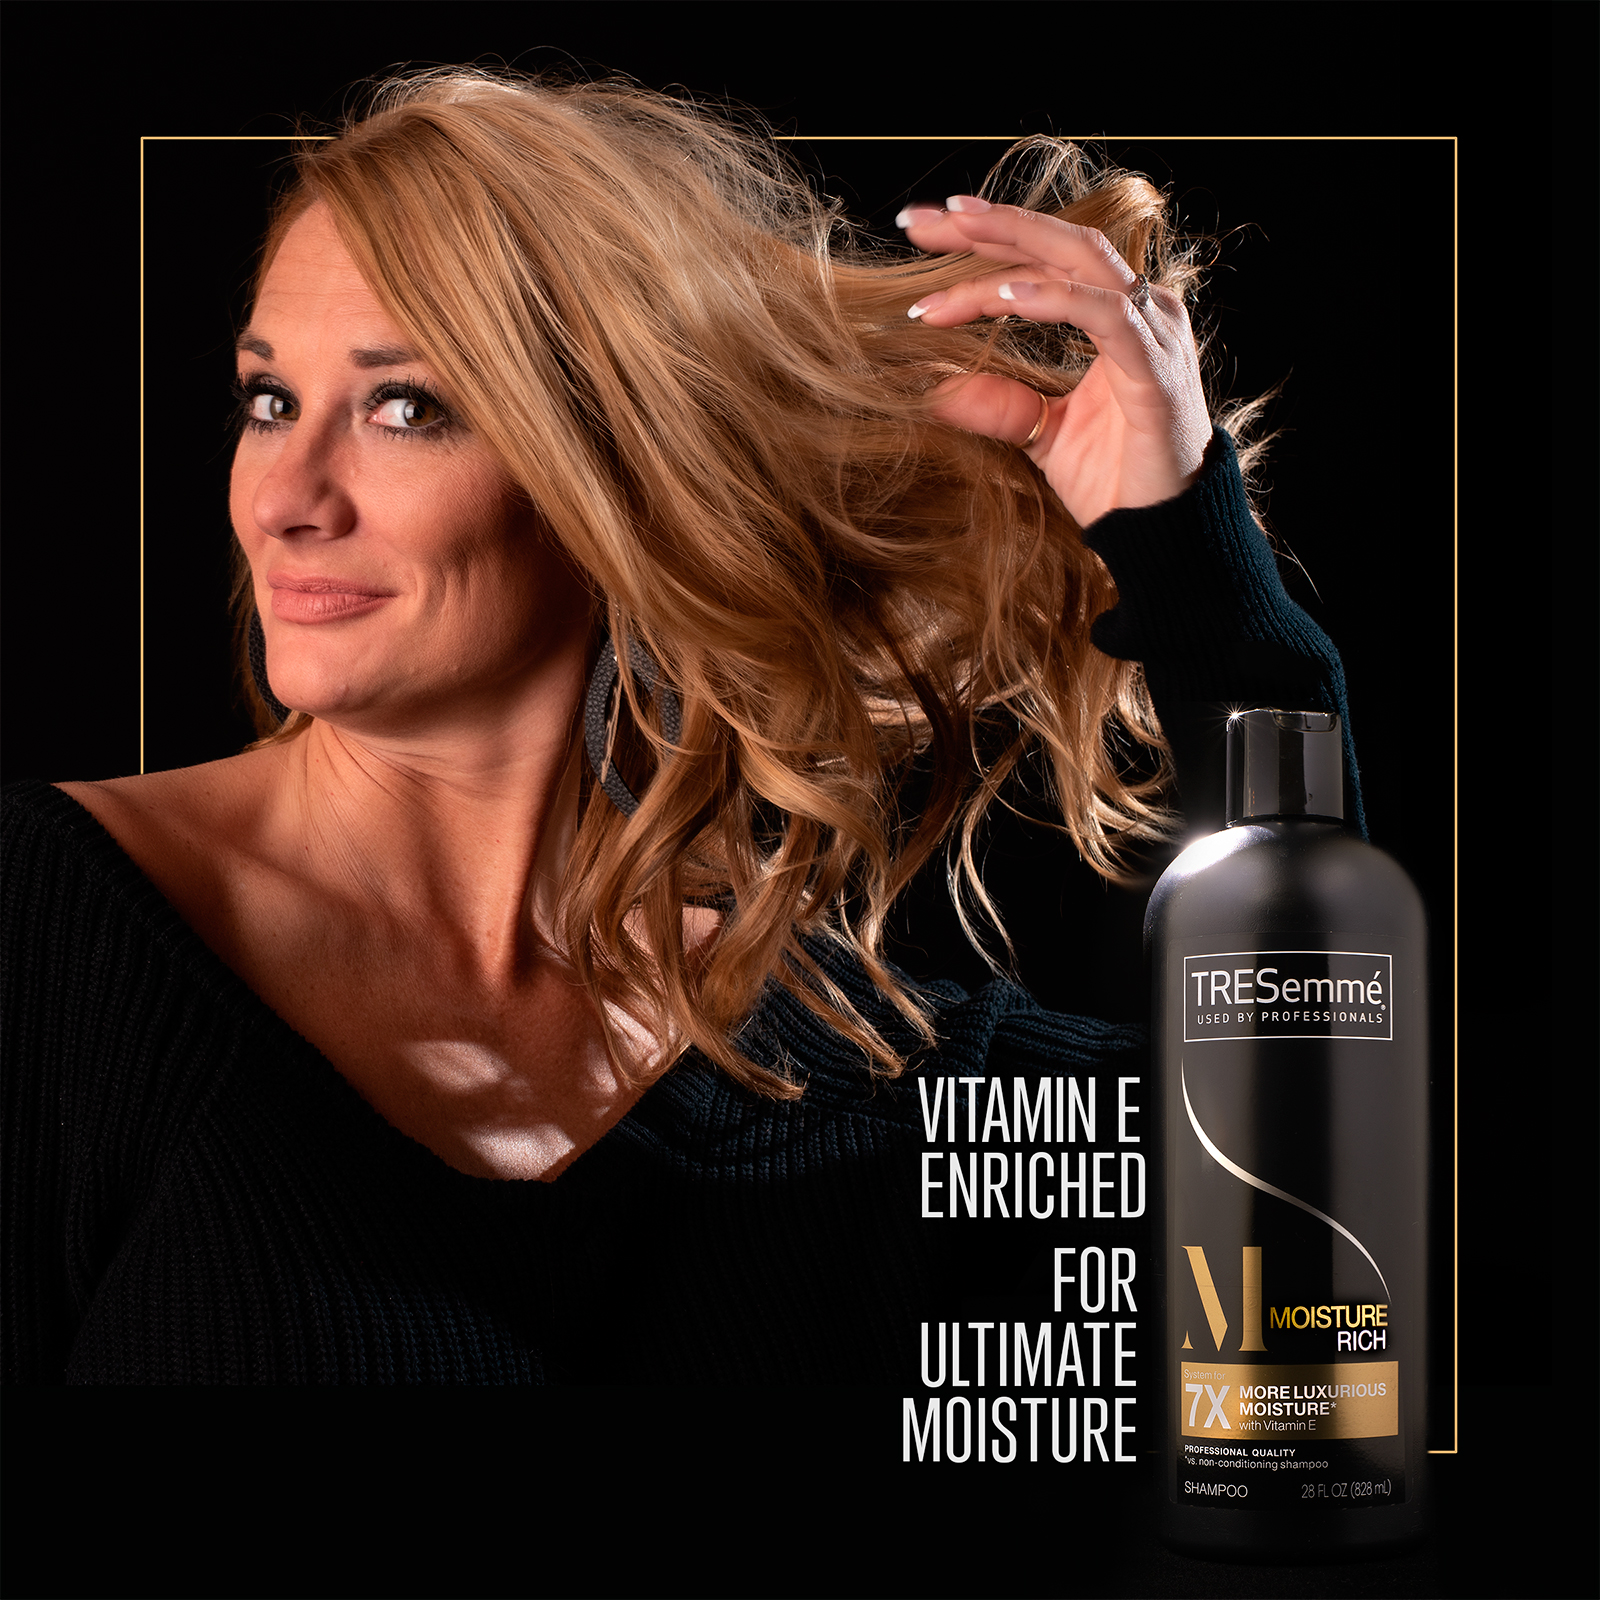 Blonde lady with shampoo bottle in a product advertisement. 